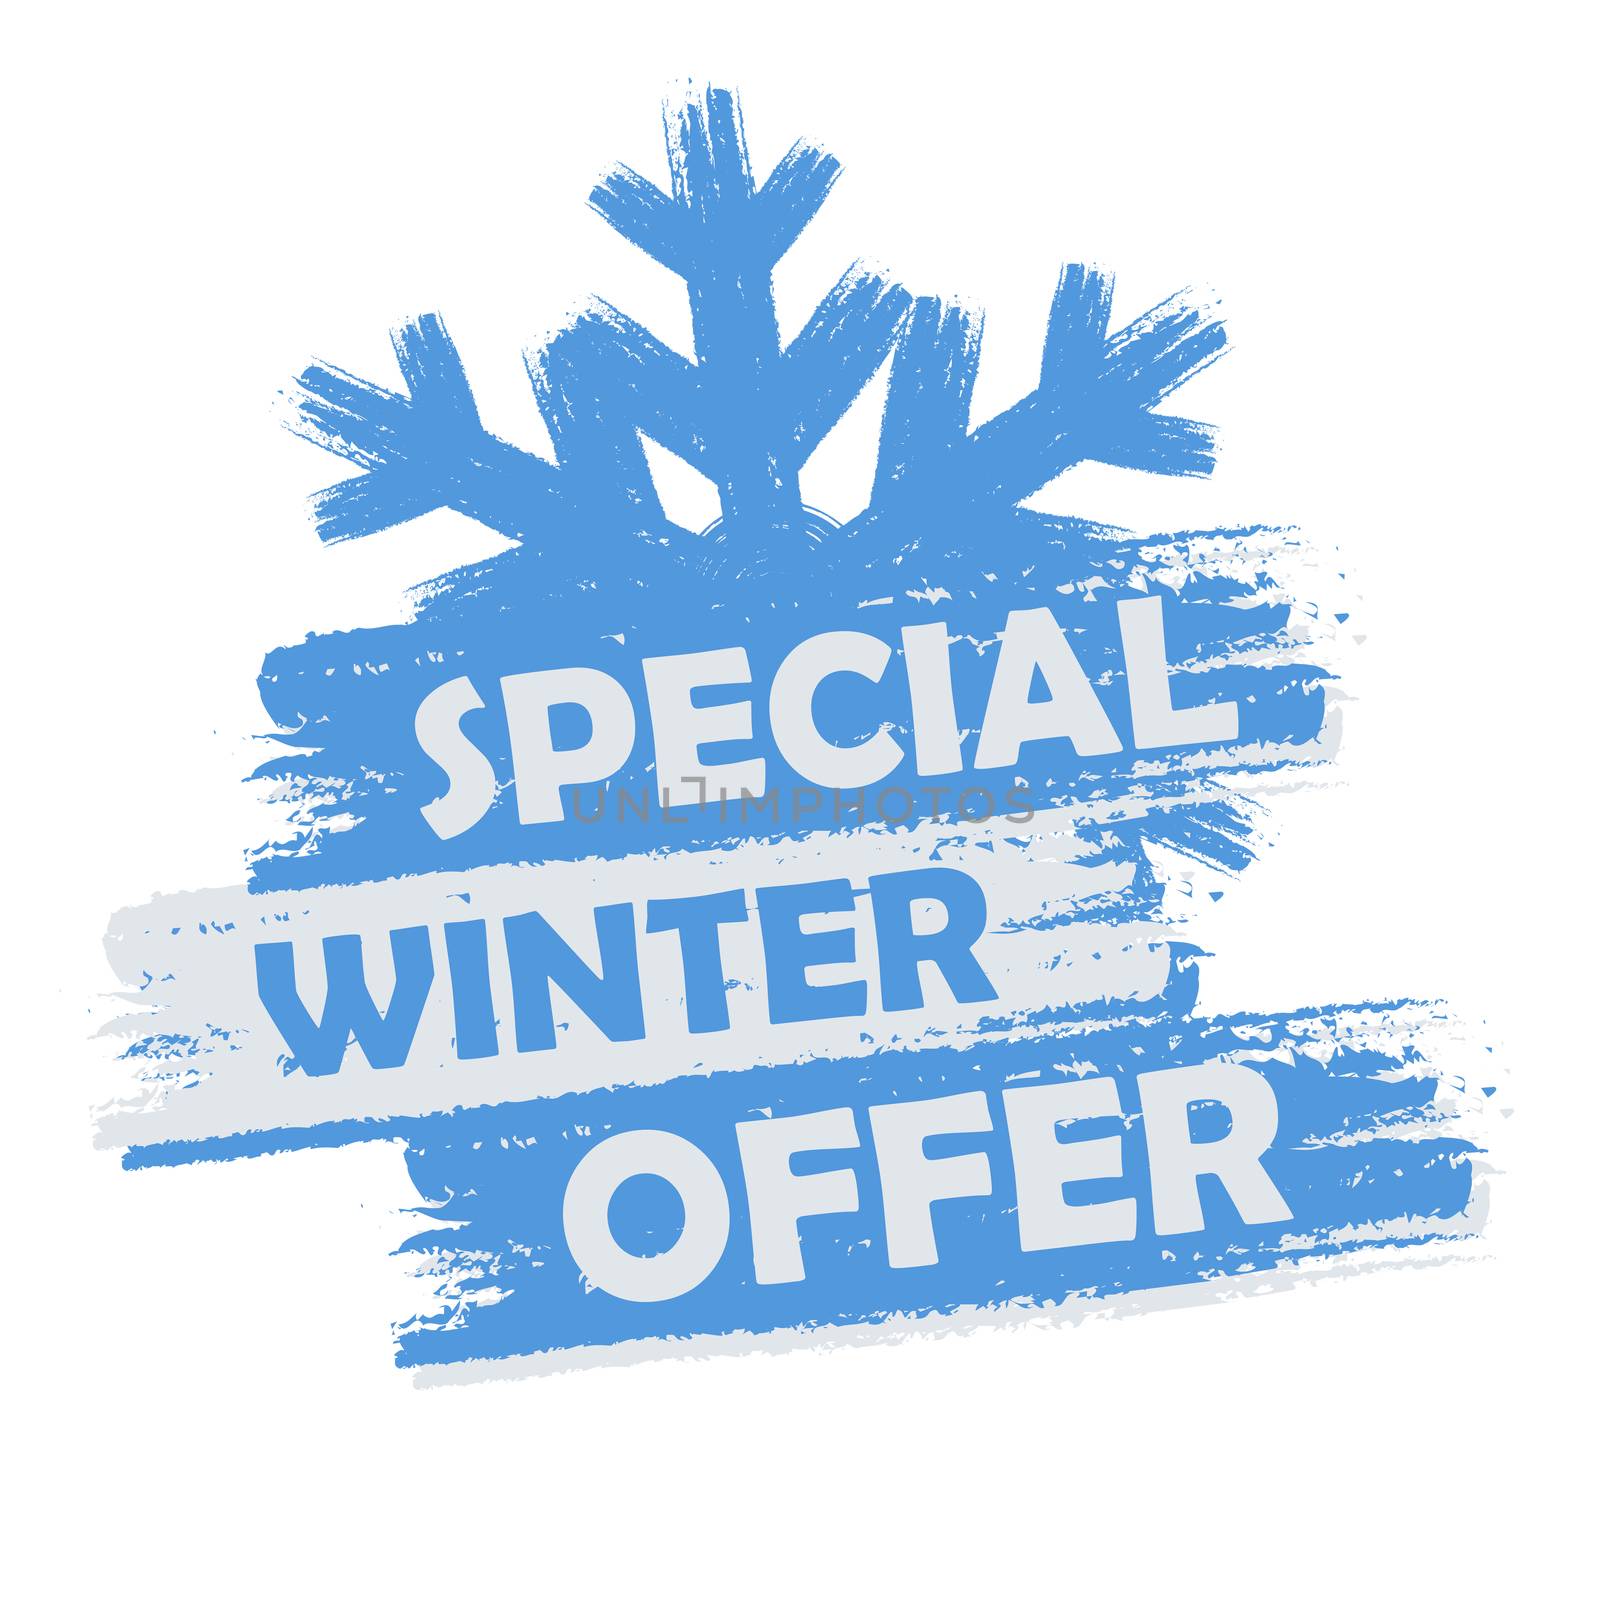 special winter  offer banner - text in blue and white drawn label with snowflake symbol, business seasonal shopping concept